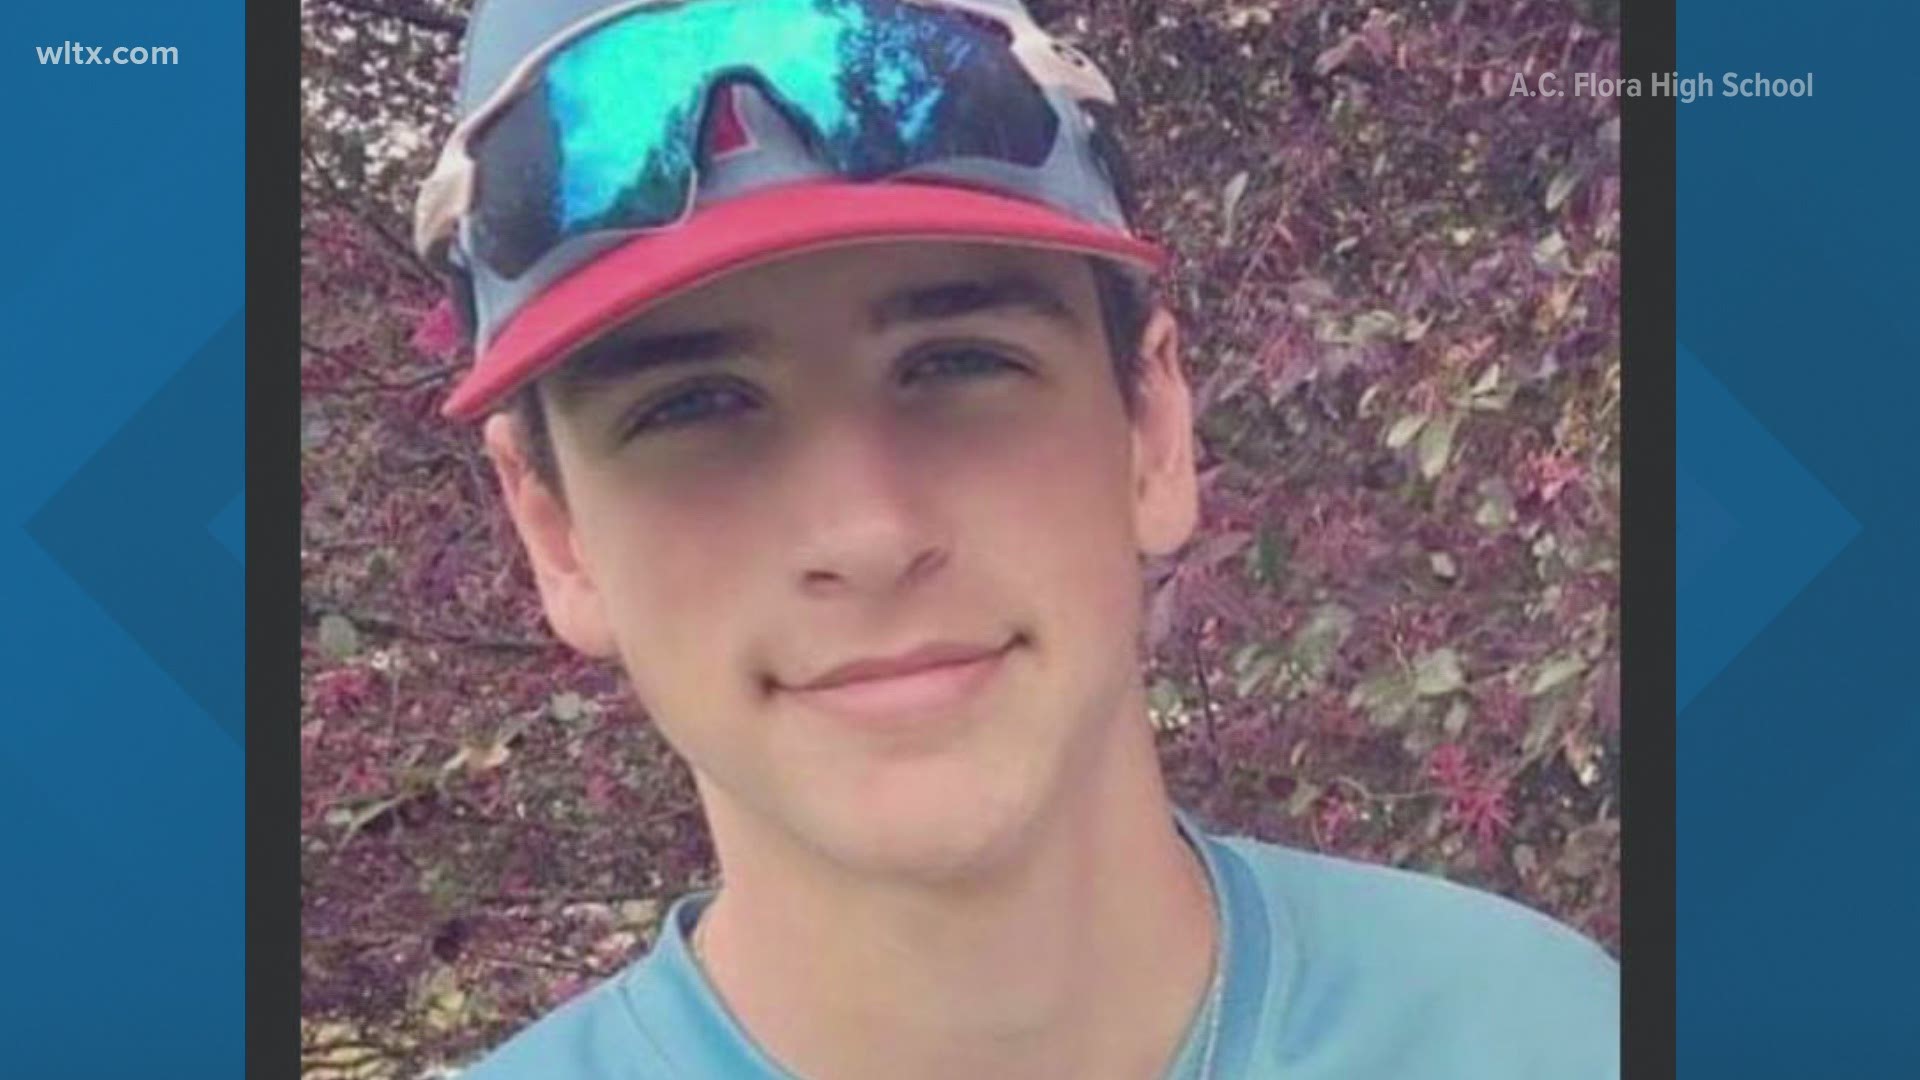 17-year-old Bailey Pratt died in the car crash that happened Saturday night.